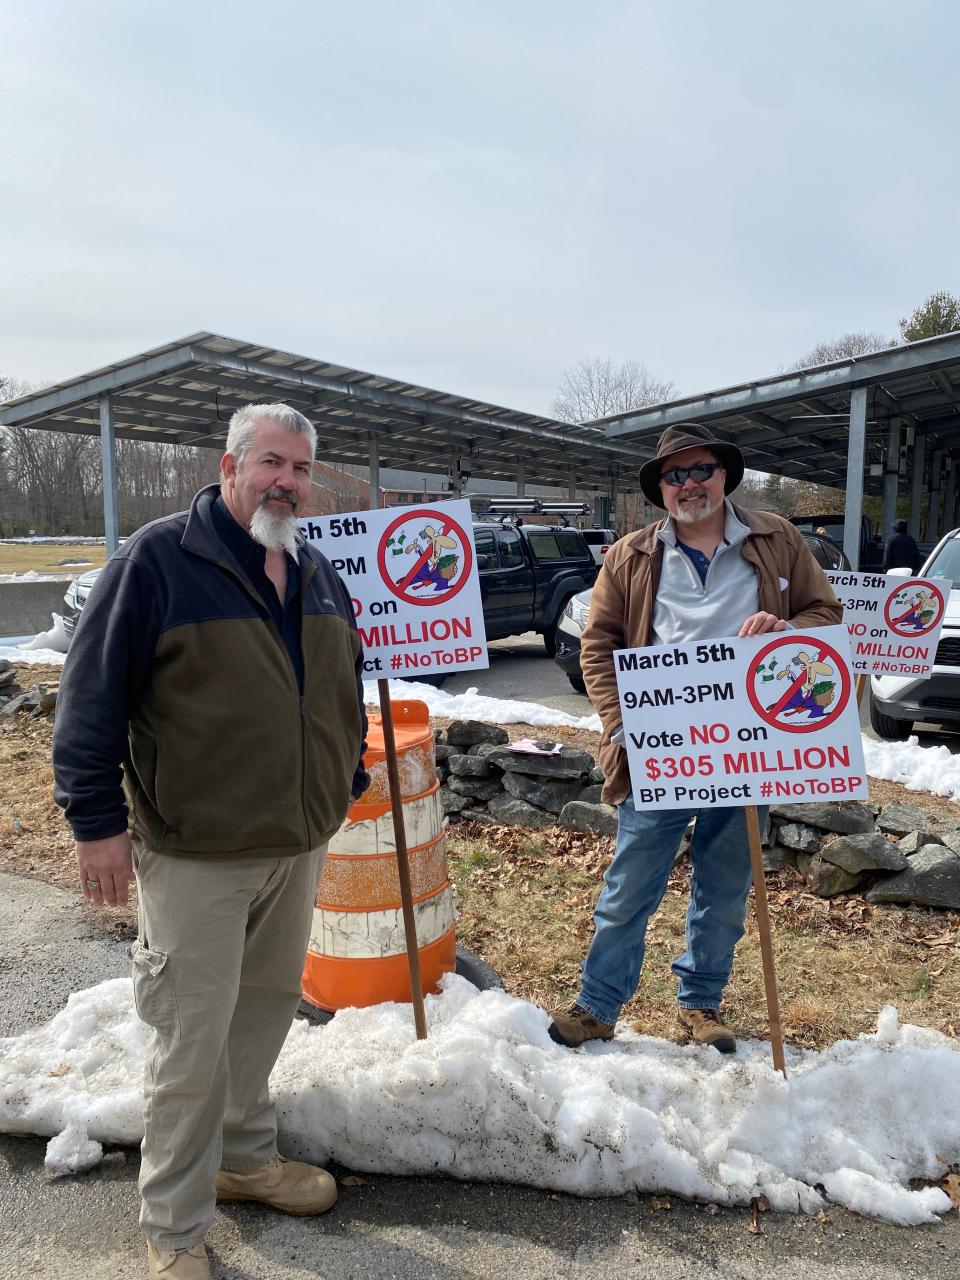 Protesters of BP Proposal Outside Dighton Elementary School on March 5, 2022